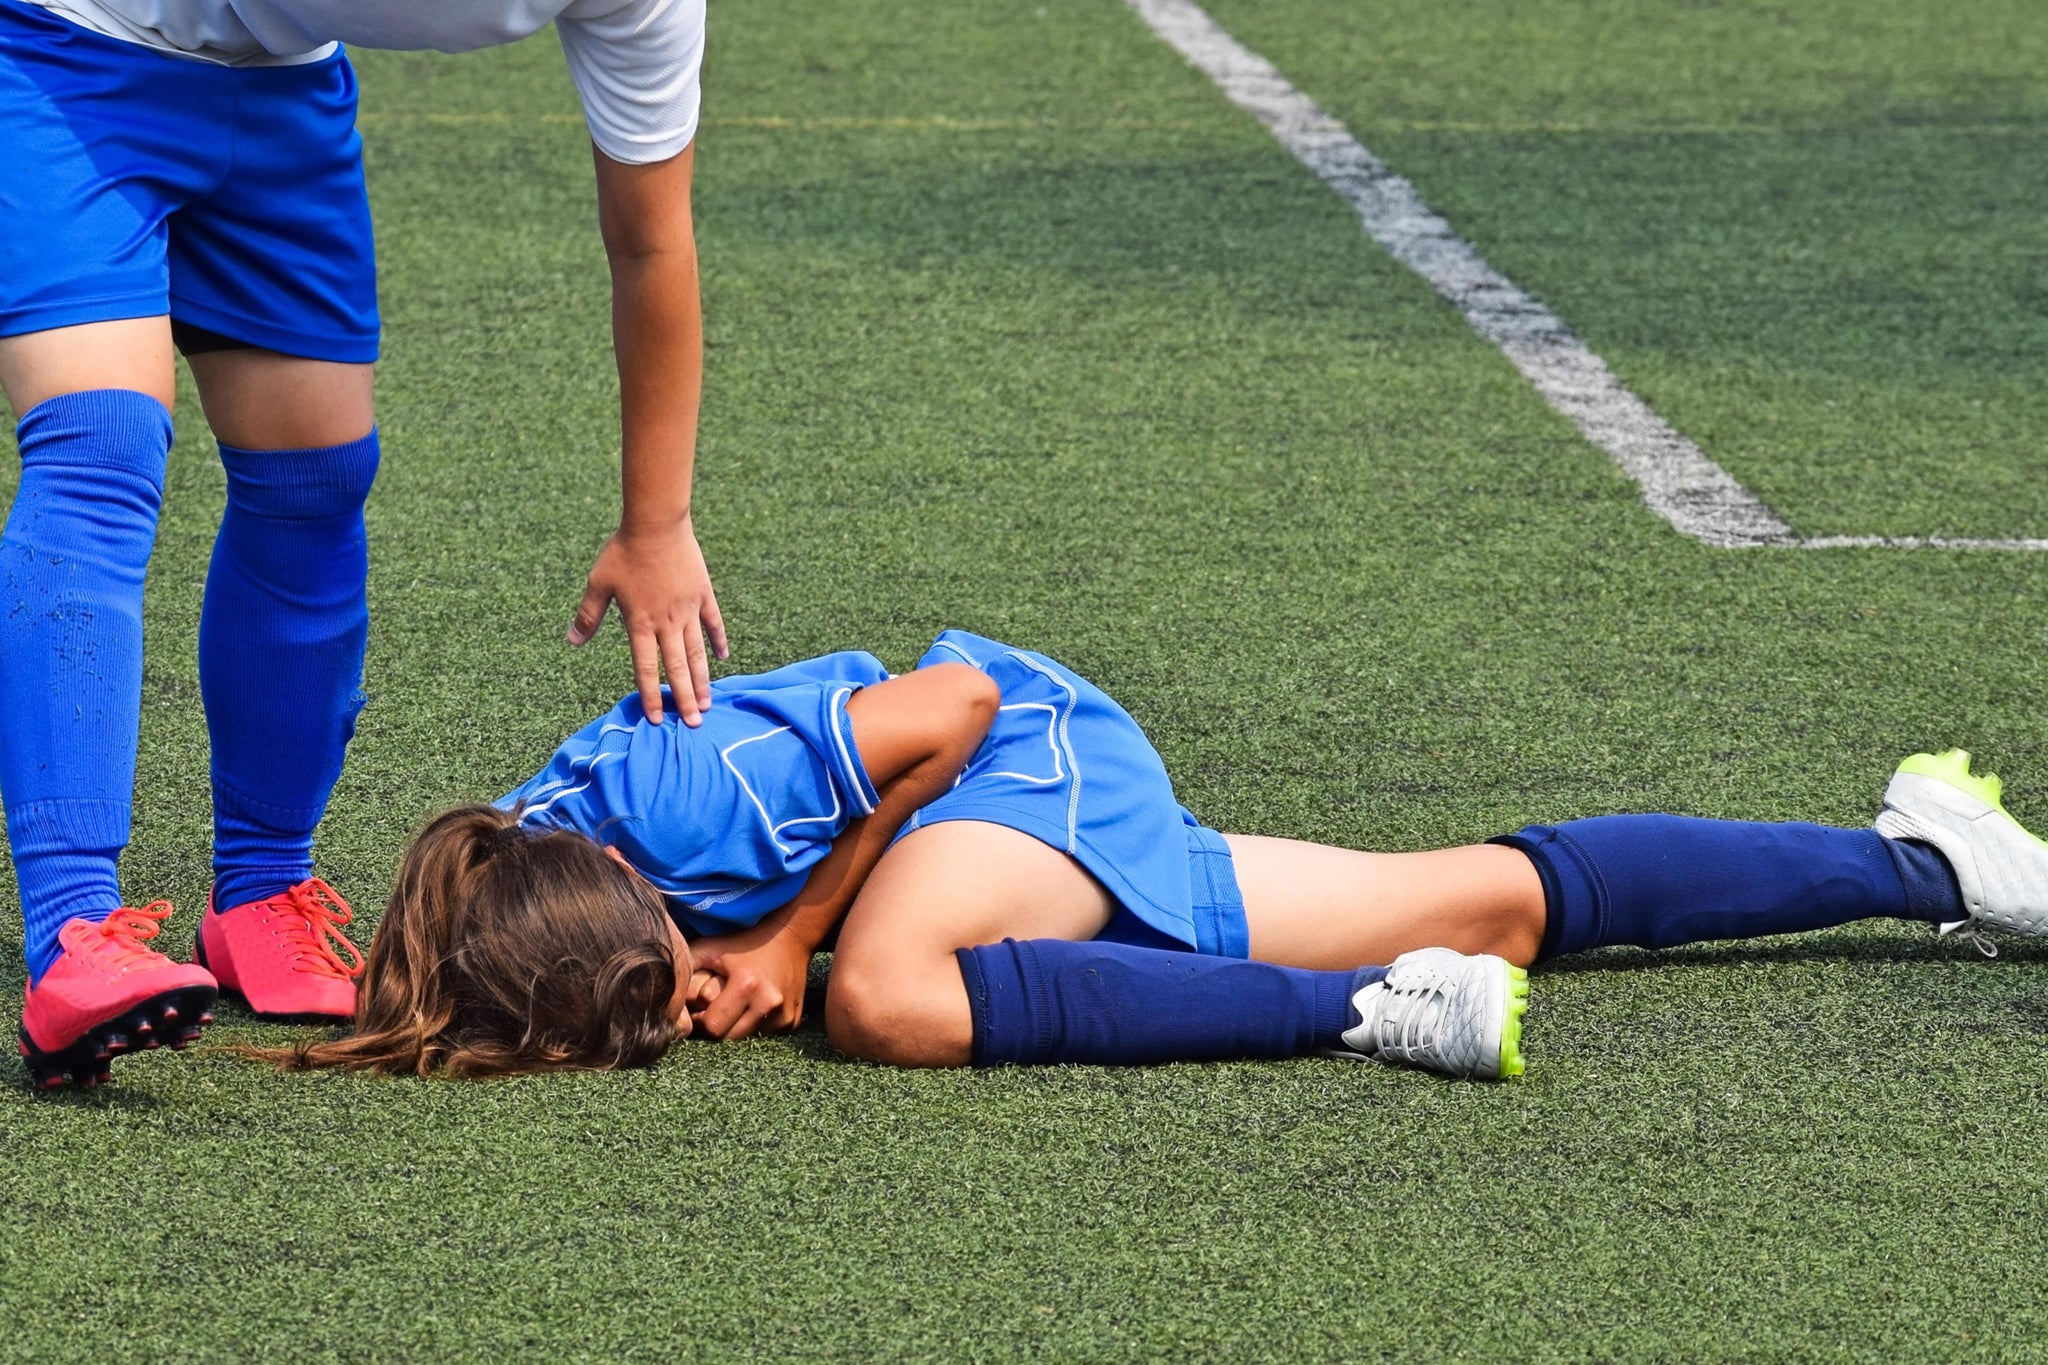 Injured female athlete during a female soccer match